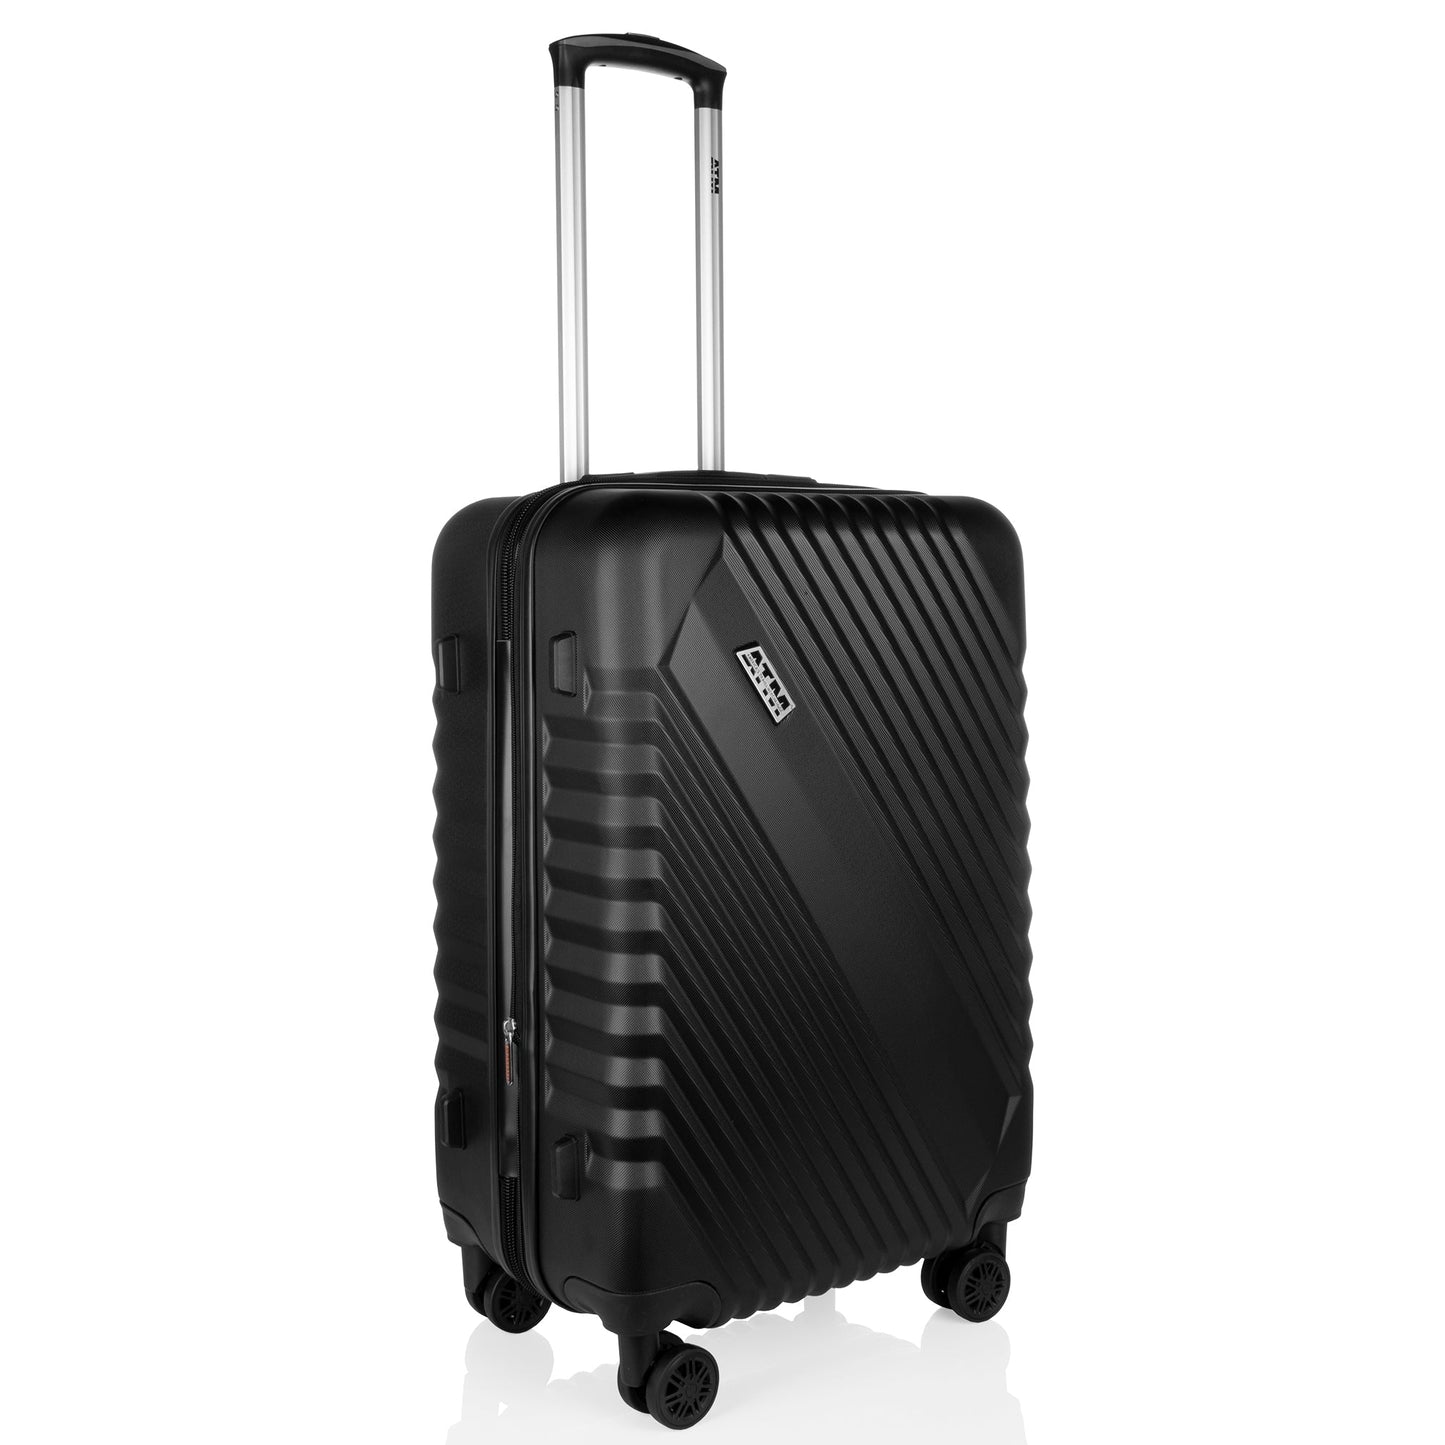 Core Collection Black Luggage 3 Piece Set (20/24/28") Suitcase Lock Spinner